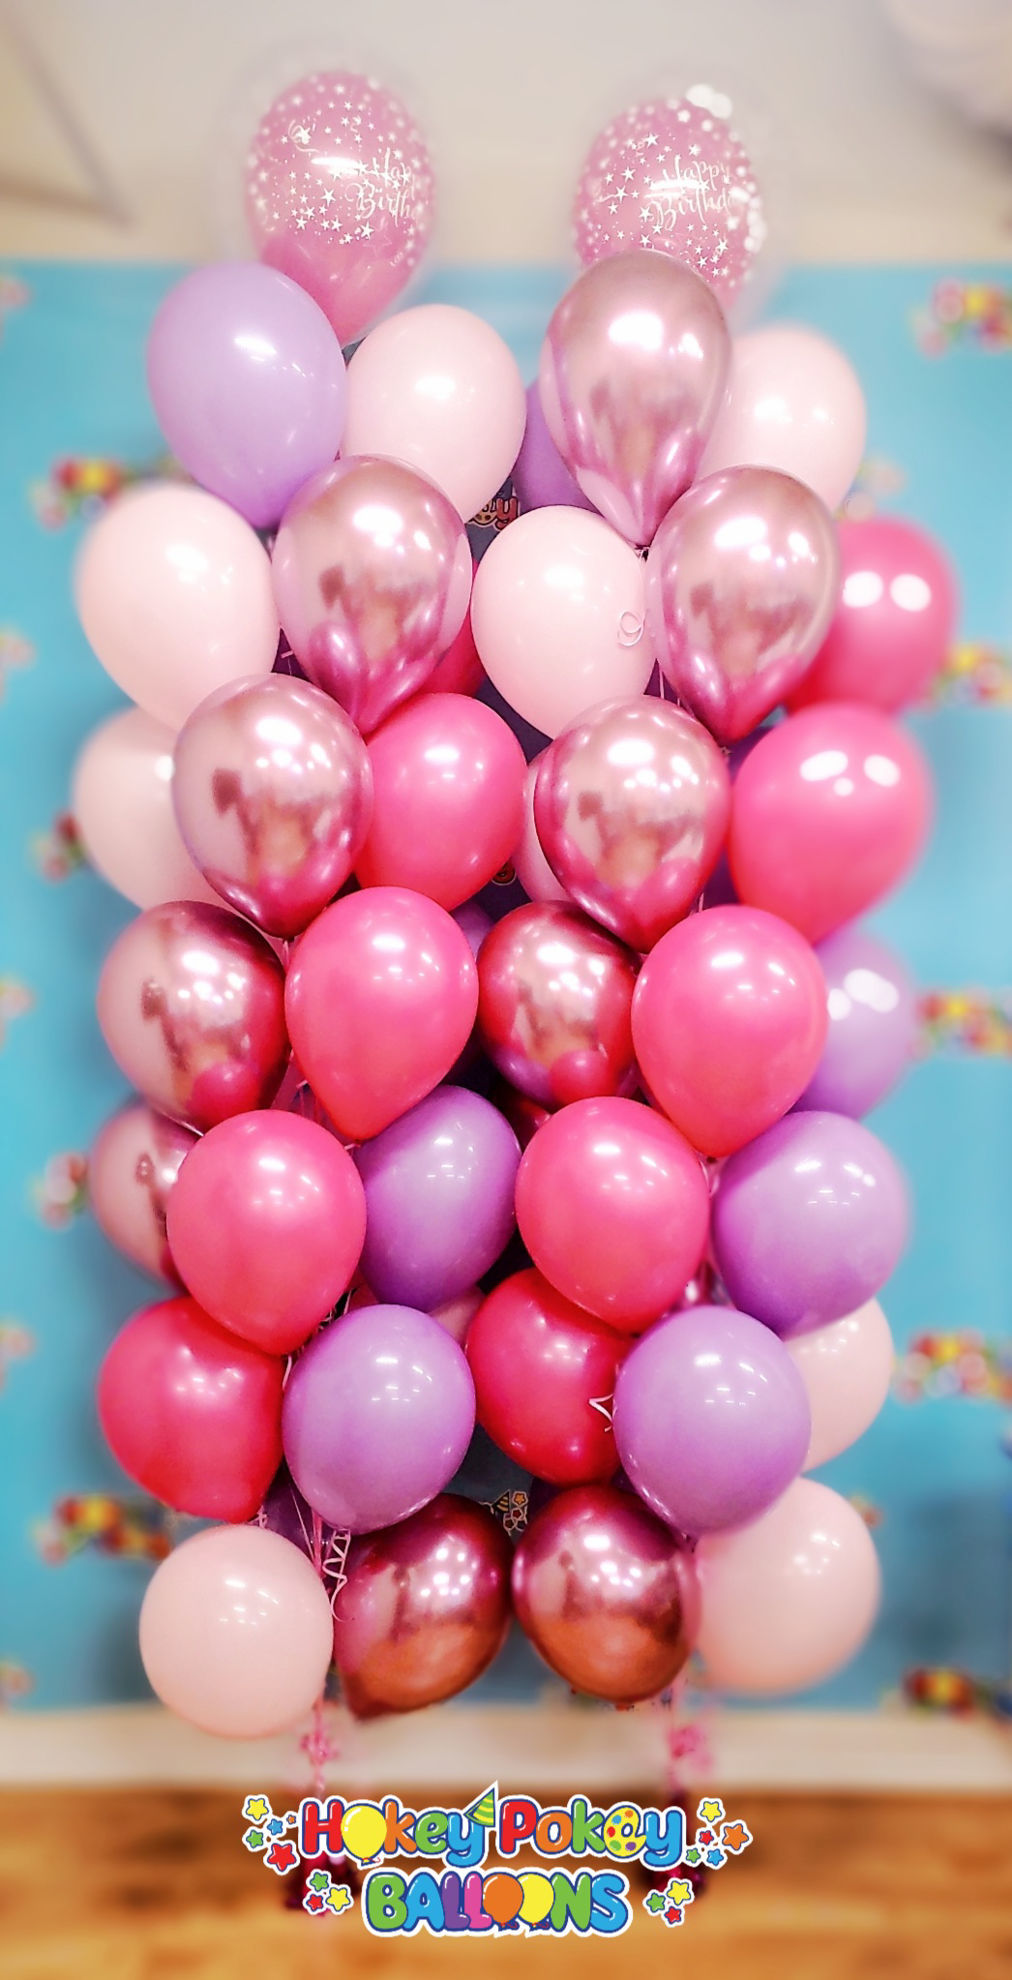 Picture of Let's Celebrate in Style - Luxury Balloon Bouquet